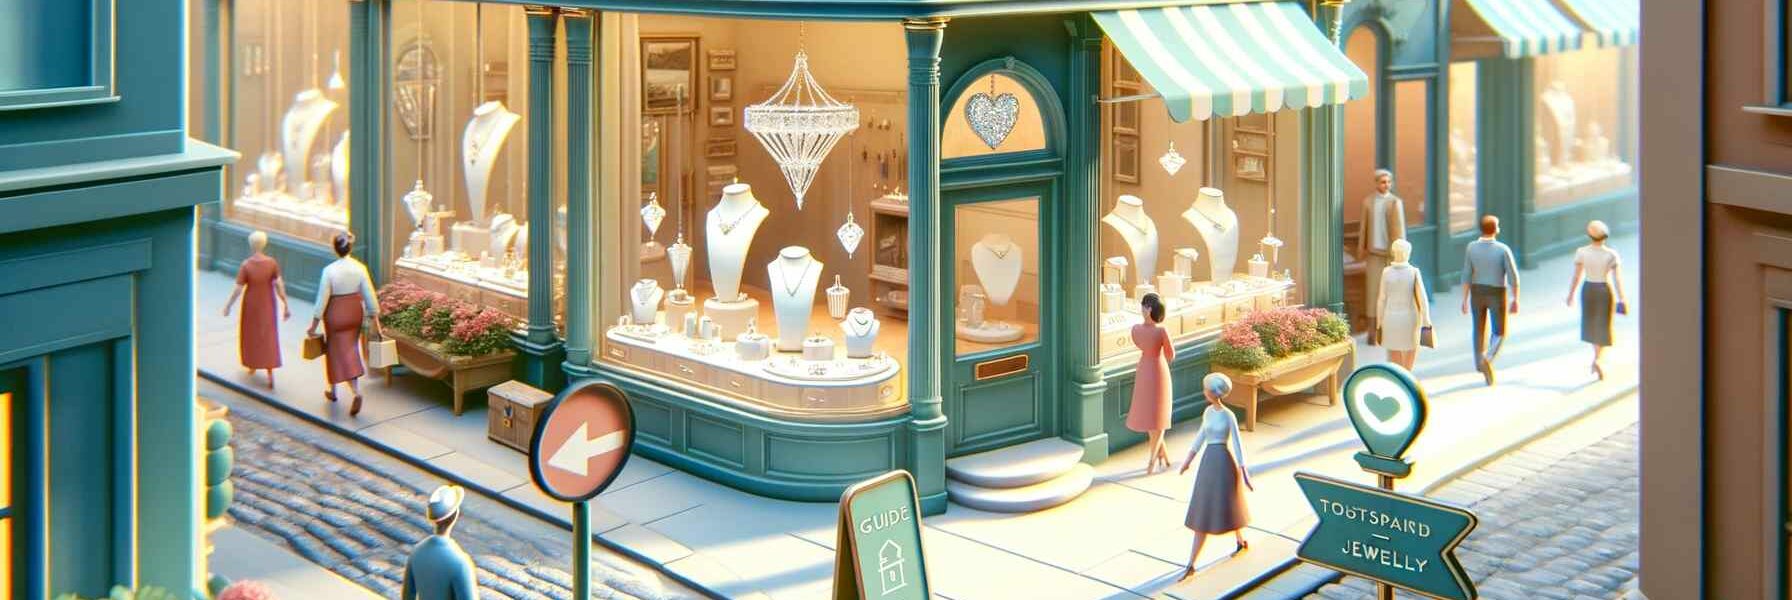 A Bustling Street Scene Depicting The Journey Of Finding Reputable Jewelers, With Diverse Shoppers Looking At Jewelry Shop Displays That Showcase Sparkling Jewels In Clear, Inviting Windows.